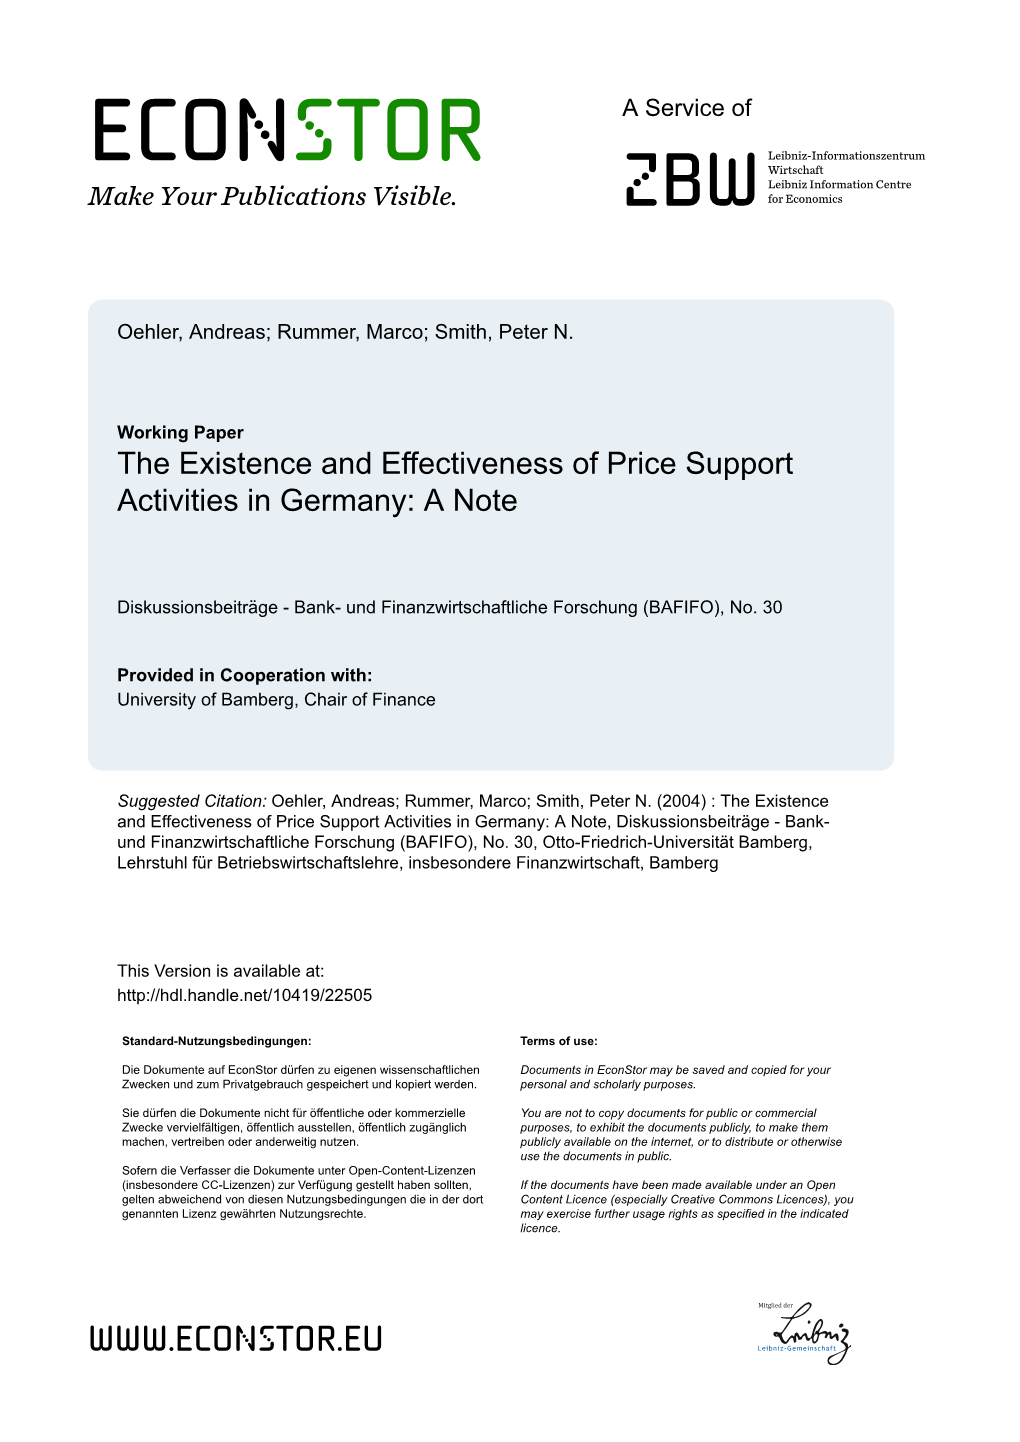 The Existence and Effectiveness of Price Support Activities in Germany: a Note